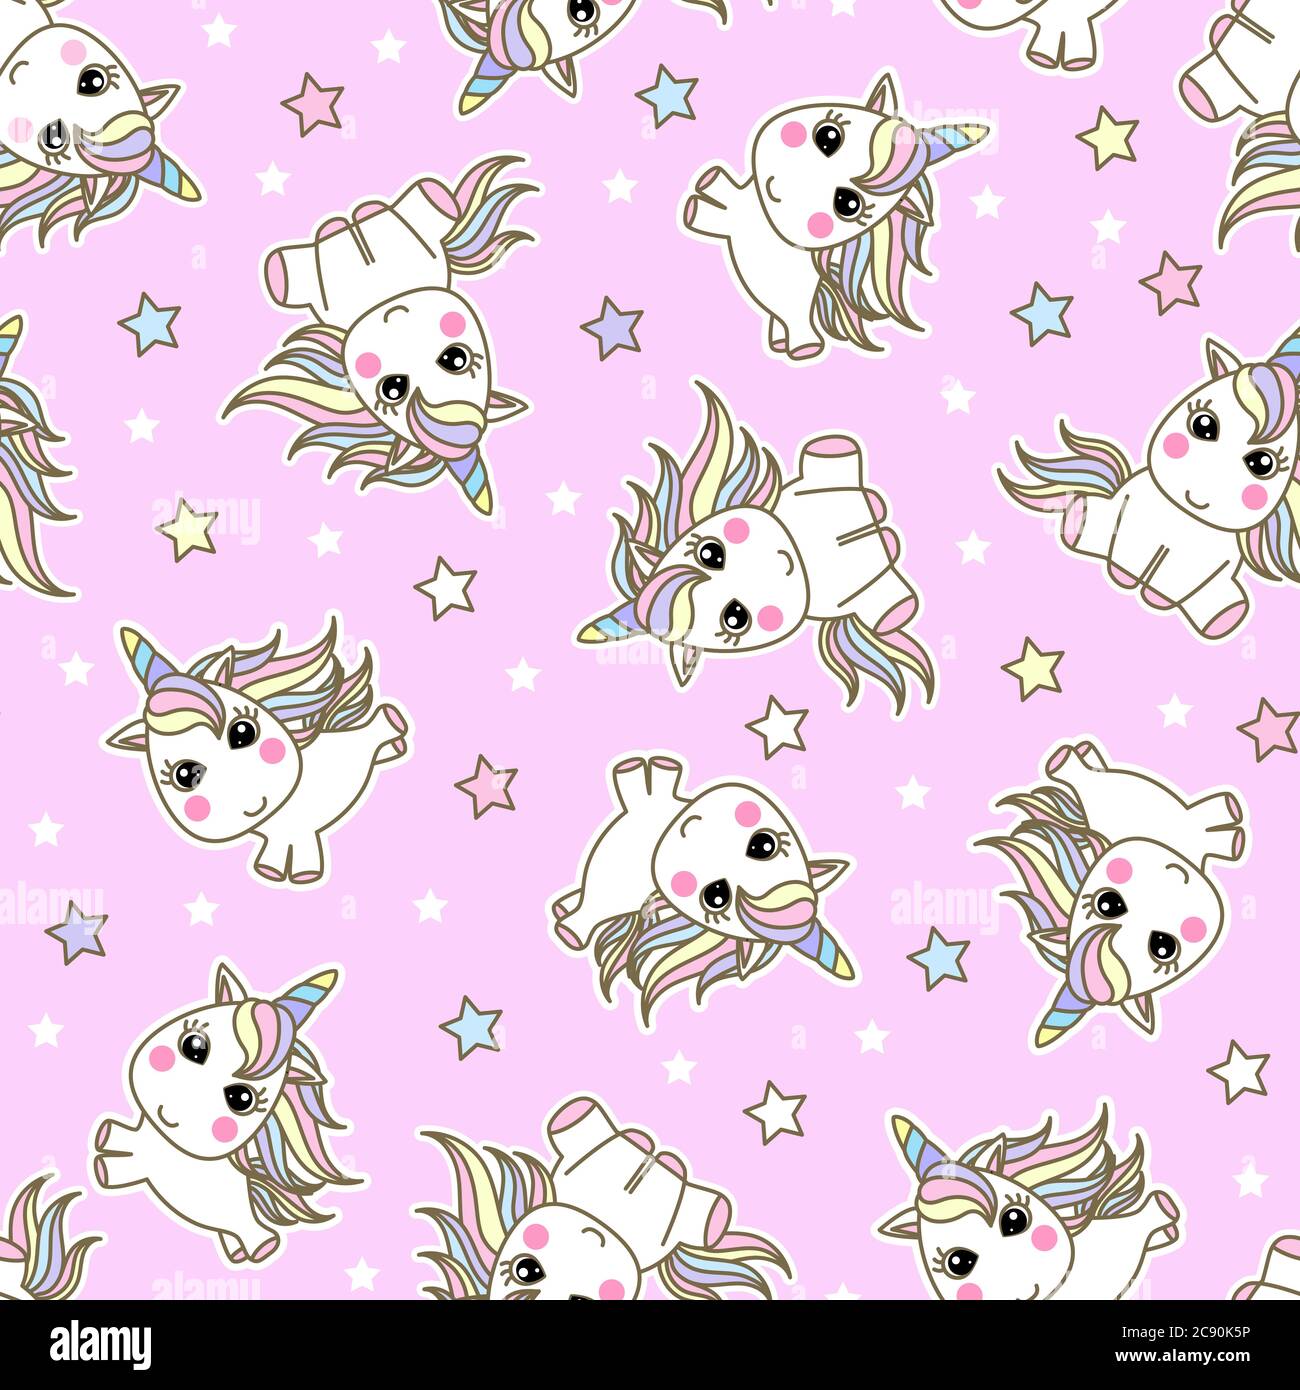 Unicorn seamless pattern. Magic vector background with cute ...